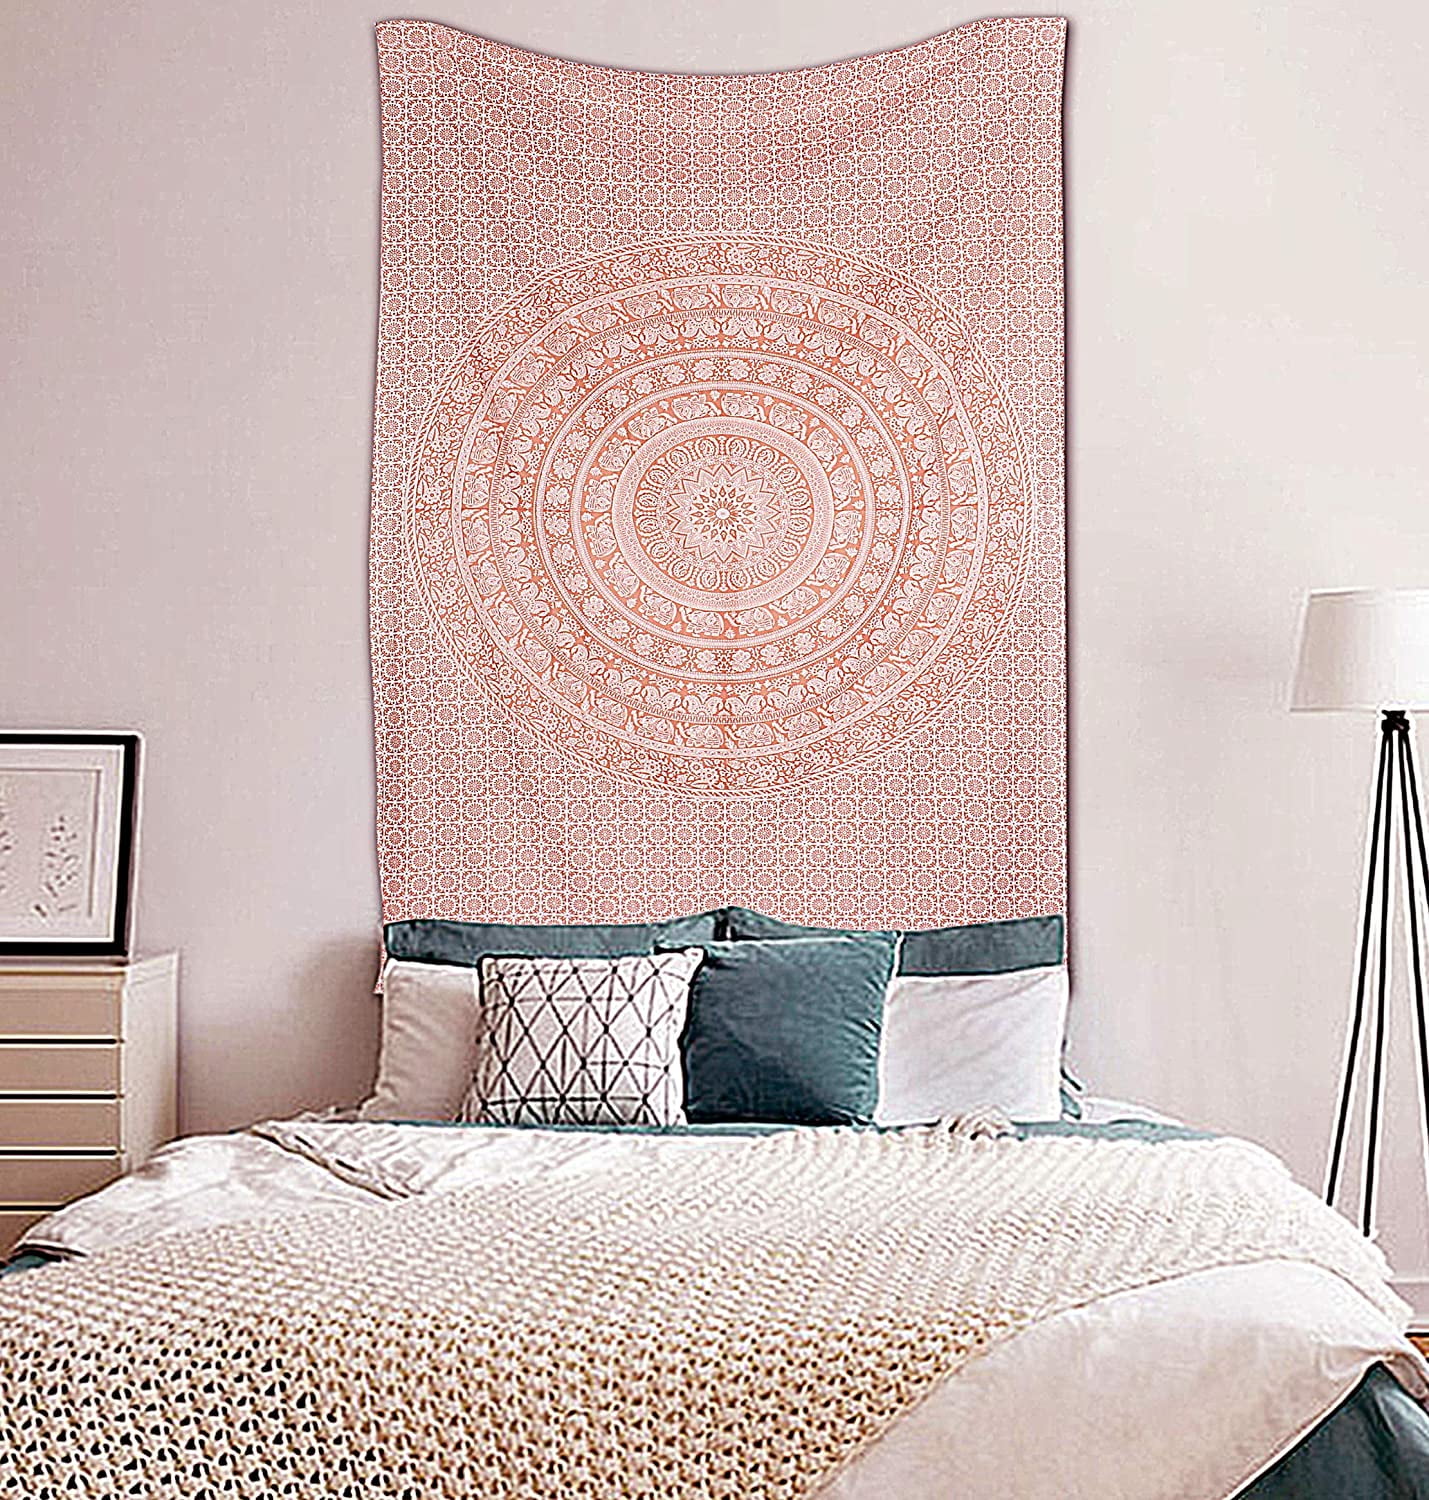 Small Tapestry Cycle Of The Age Design Wall Hanging Poster Cotton Fabric Indian 